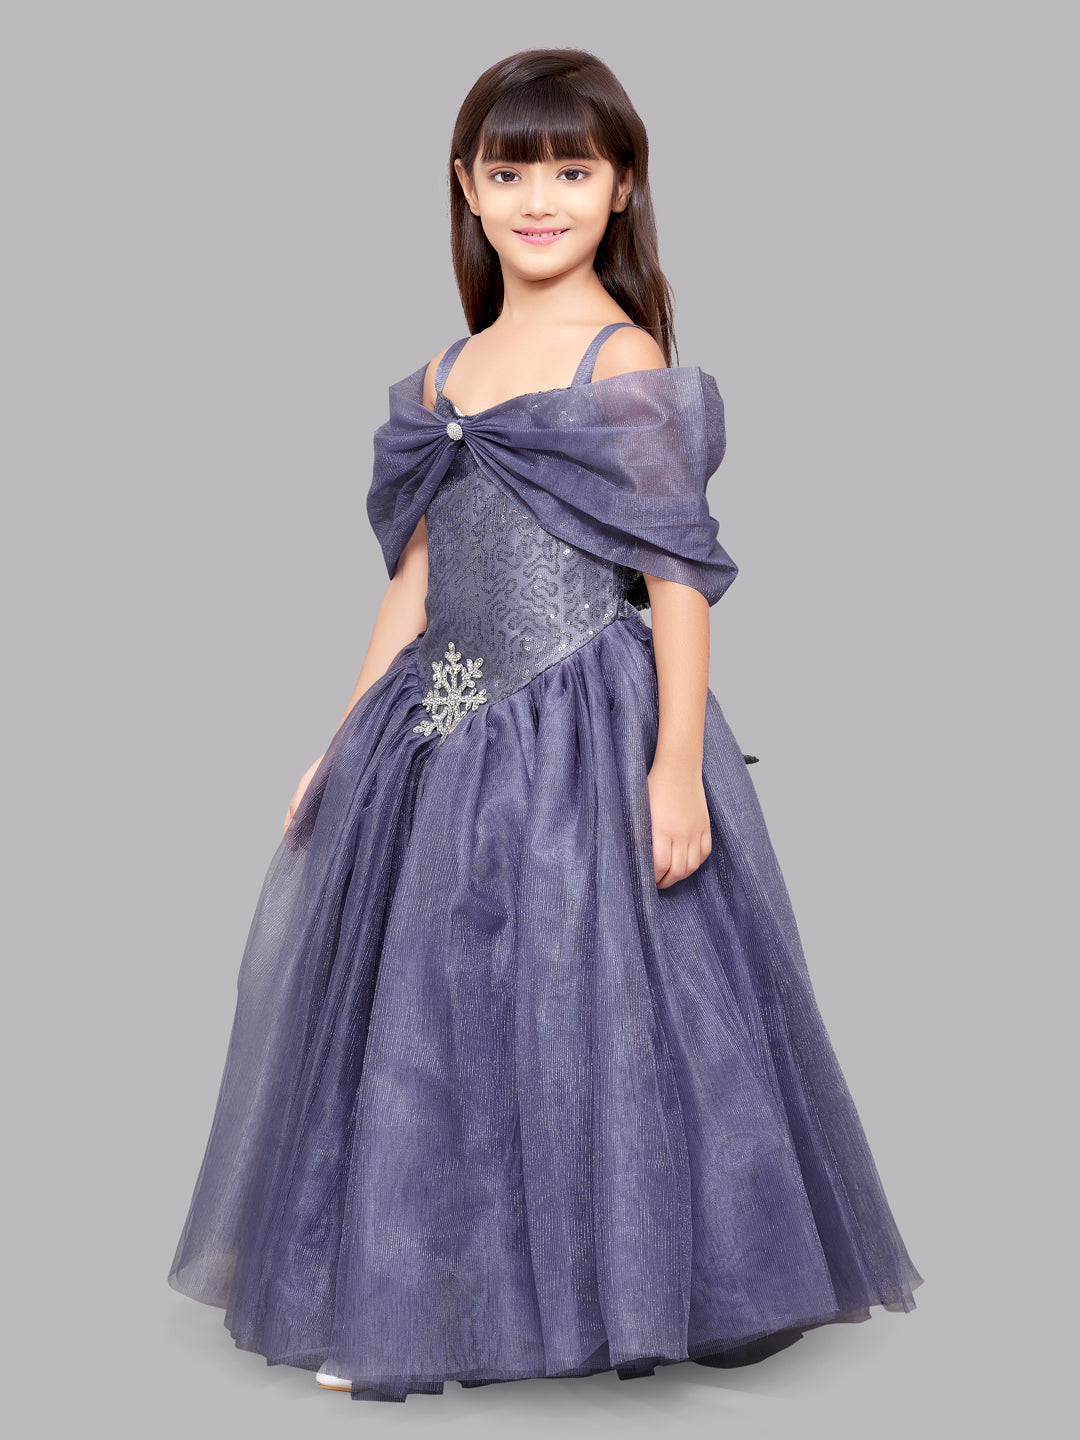 Sweetheart Valencia Quinceanera Ball Gown Dress 60110 - PromHeadquarters.com